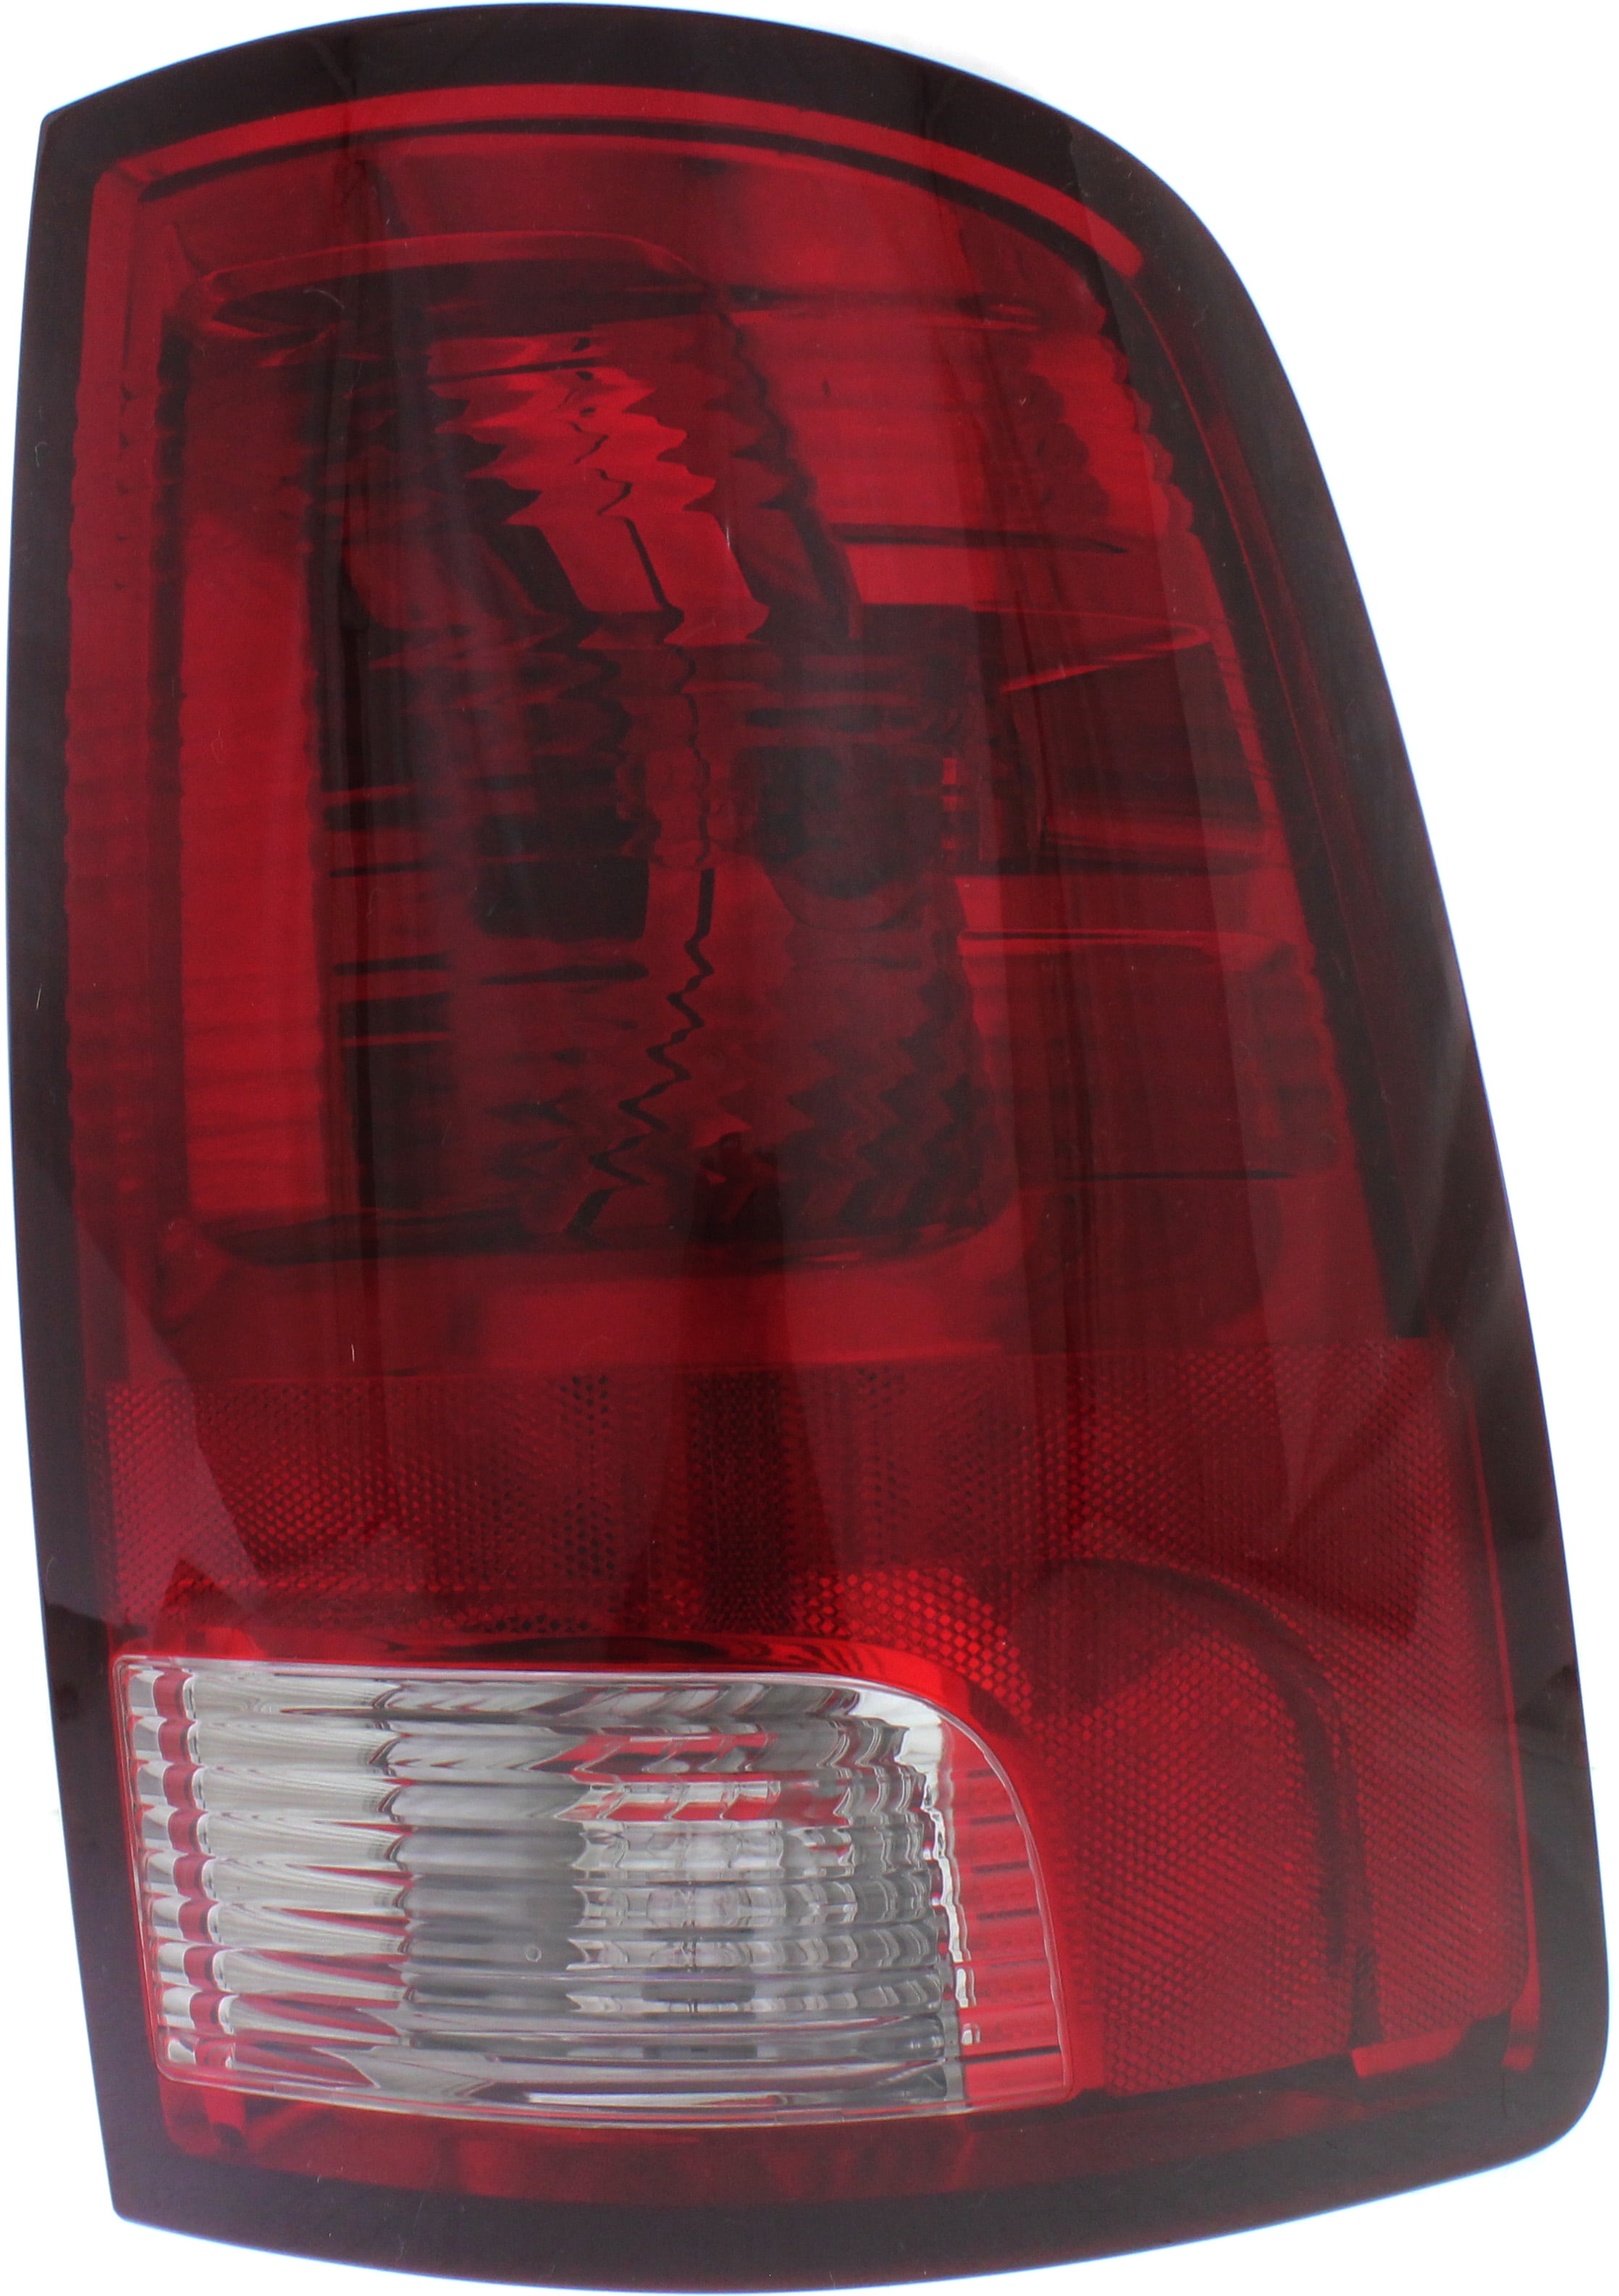 Evan Fischer Tail Light Compatible with 2013-2018 Ram 1500/2500 Clear & Red Lens Chrome Interior CAPA Driver Side 